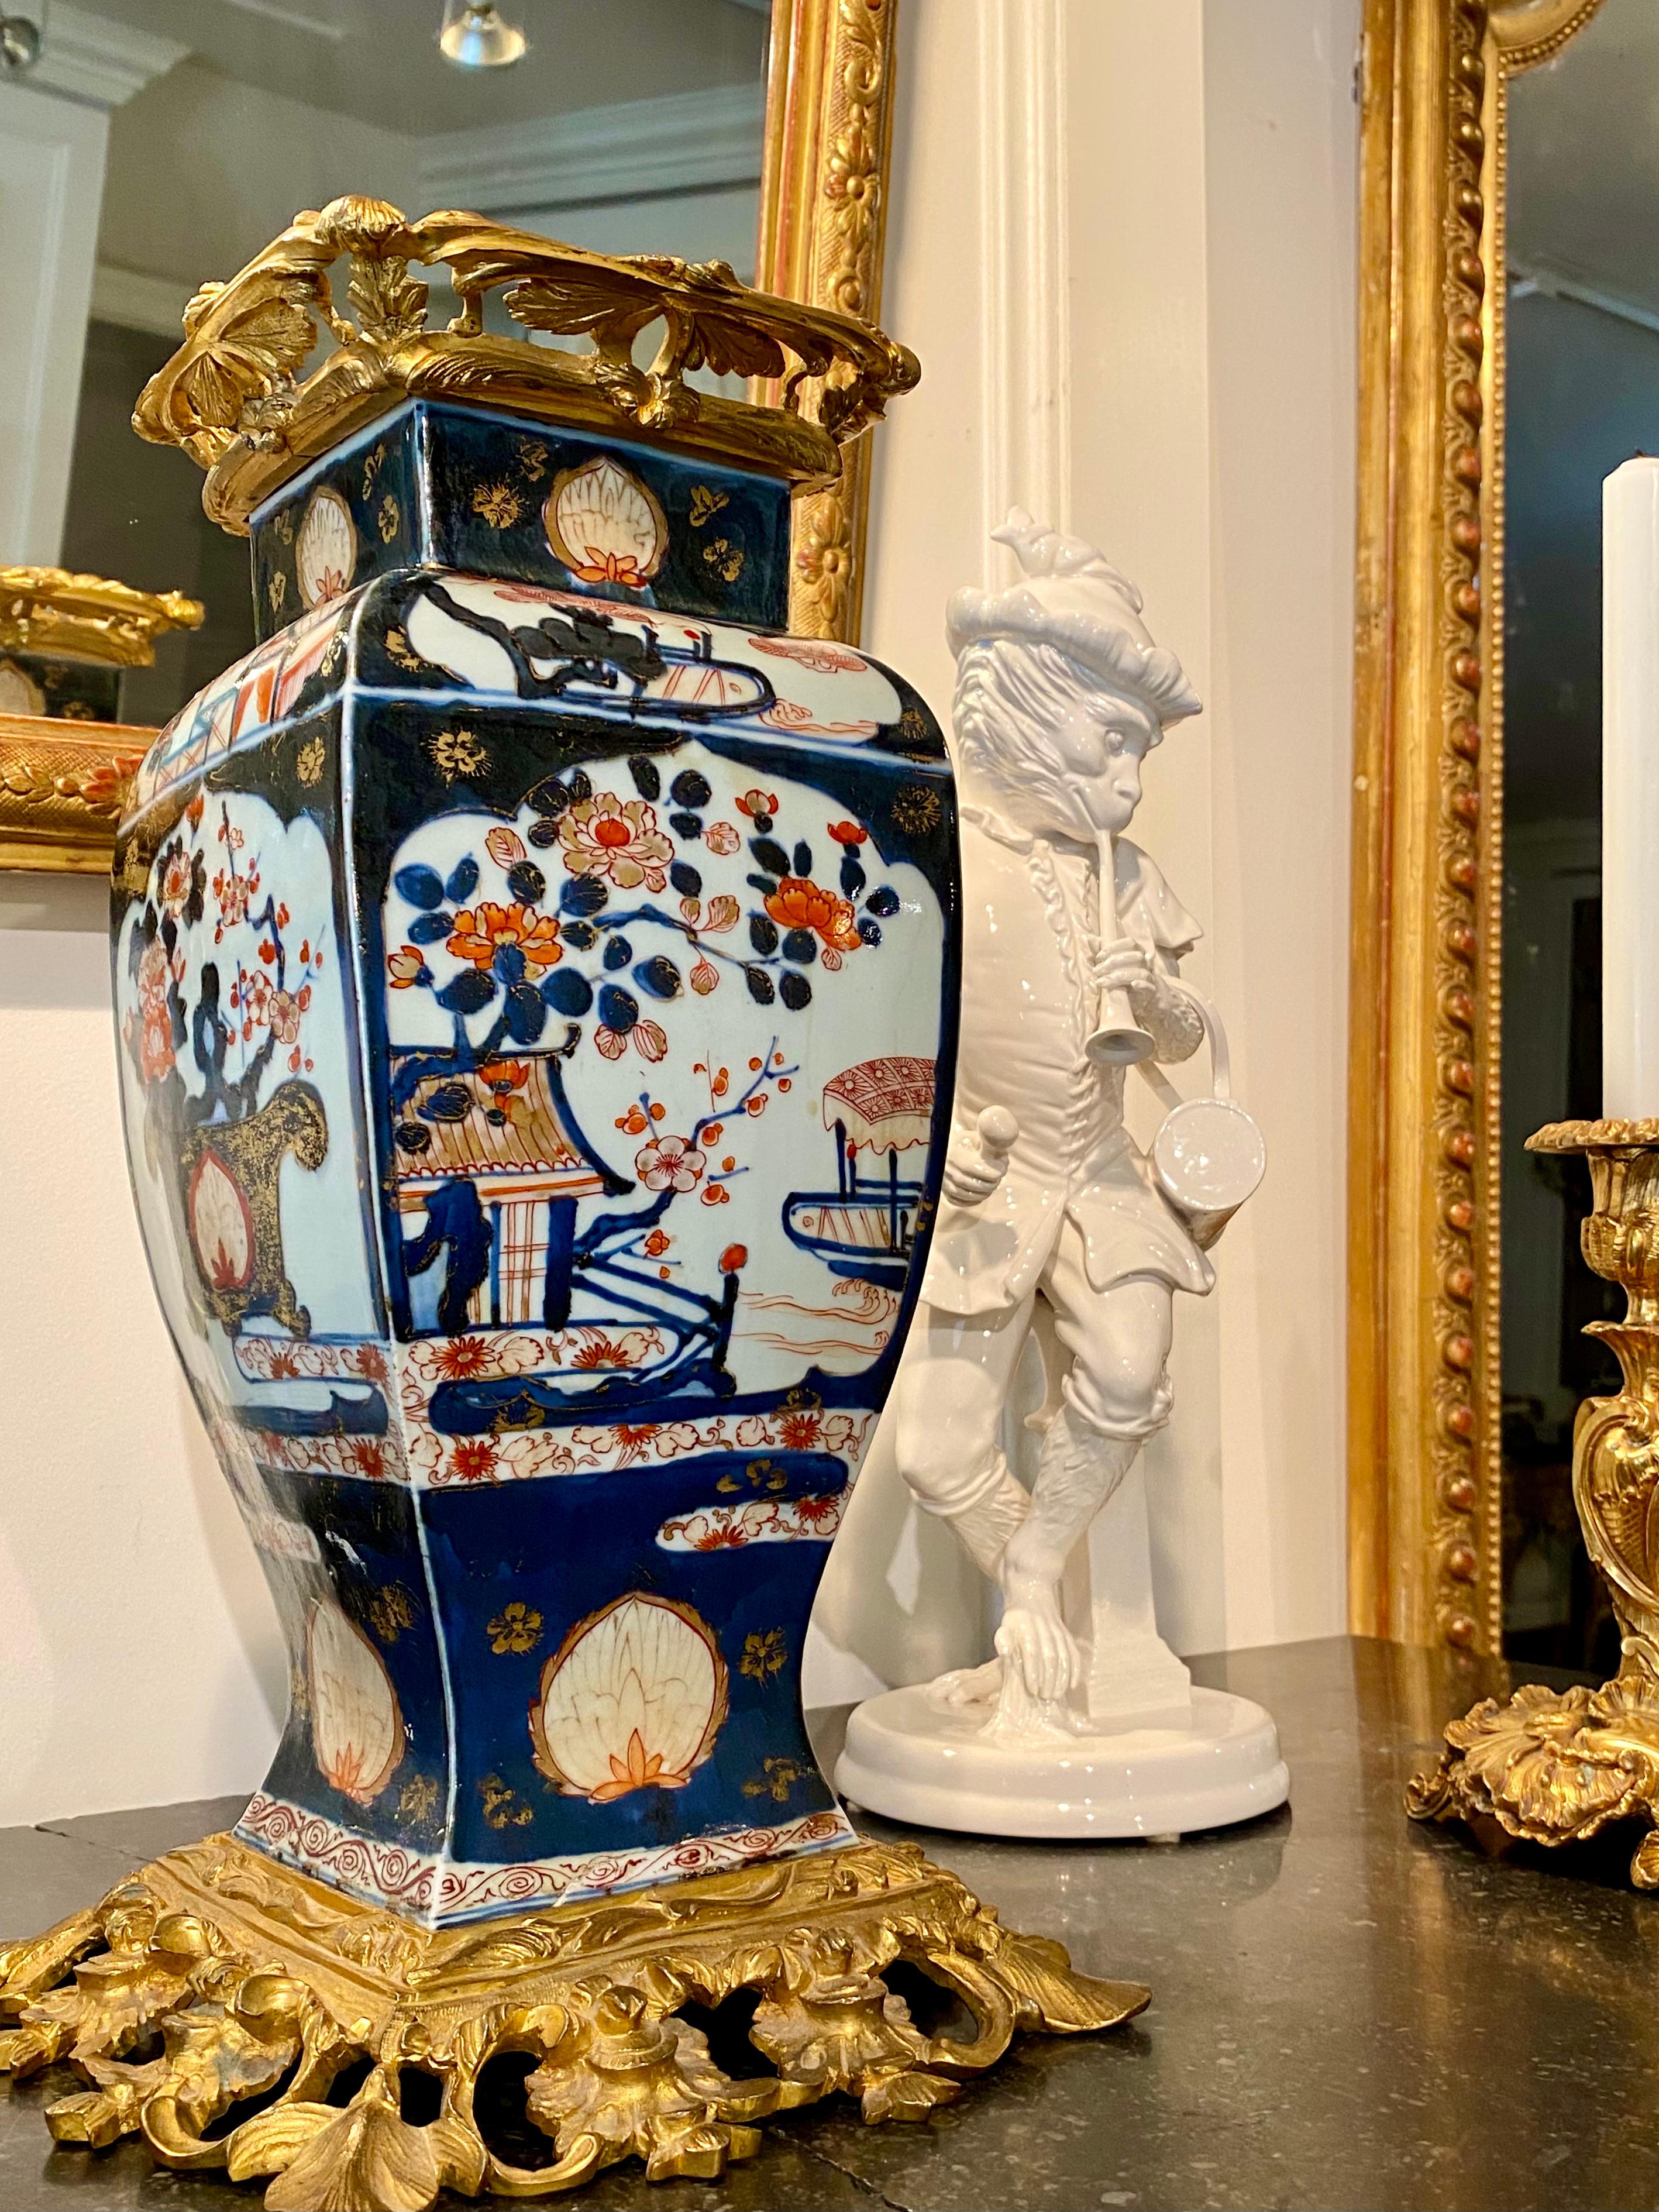 Of squared baluster form decorated with underglaze blue with red and gilt highlights and painted with boats in a harbor and flowers issuing from a vase with a foliate-cast gilt bronze pierced rim and spreading foot. Very beautiful vase, lovely